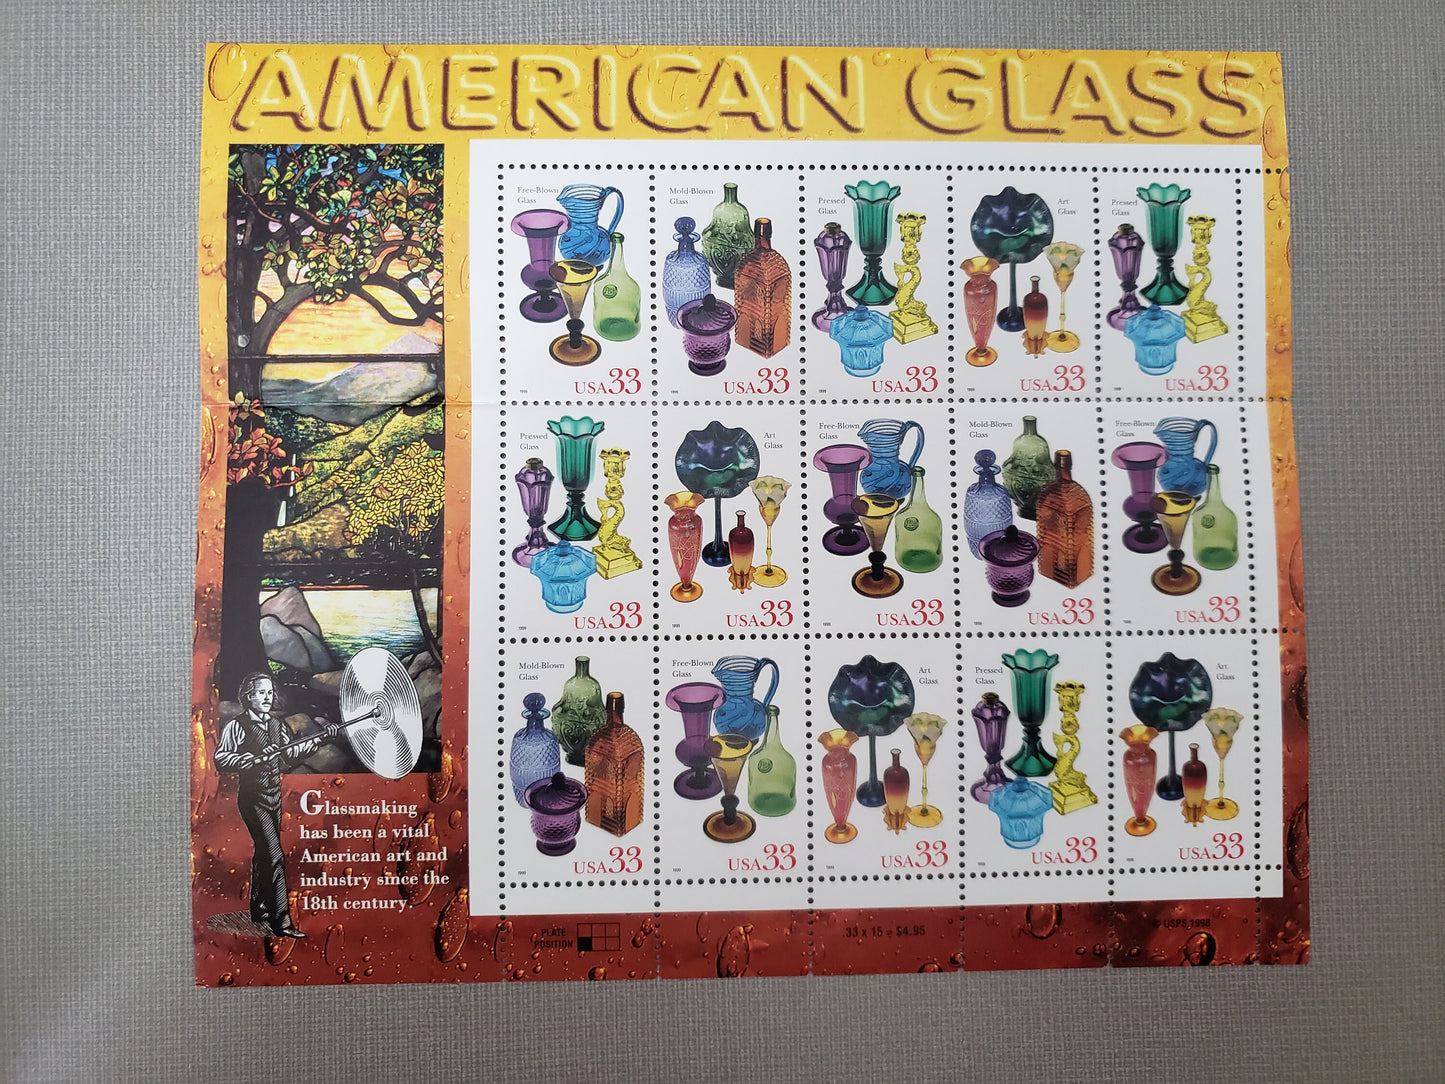 American Glass Full Sheet of 15 Unused US Postage Stamps 33c Glassmaking Free-Blown